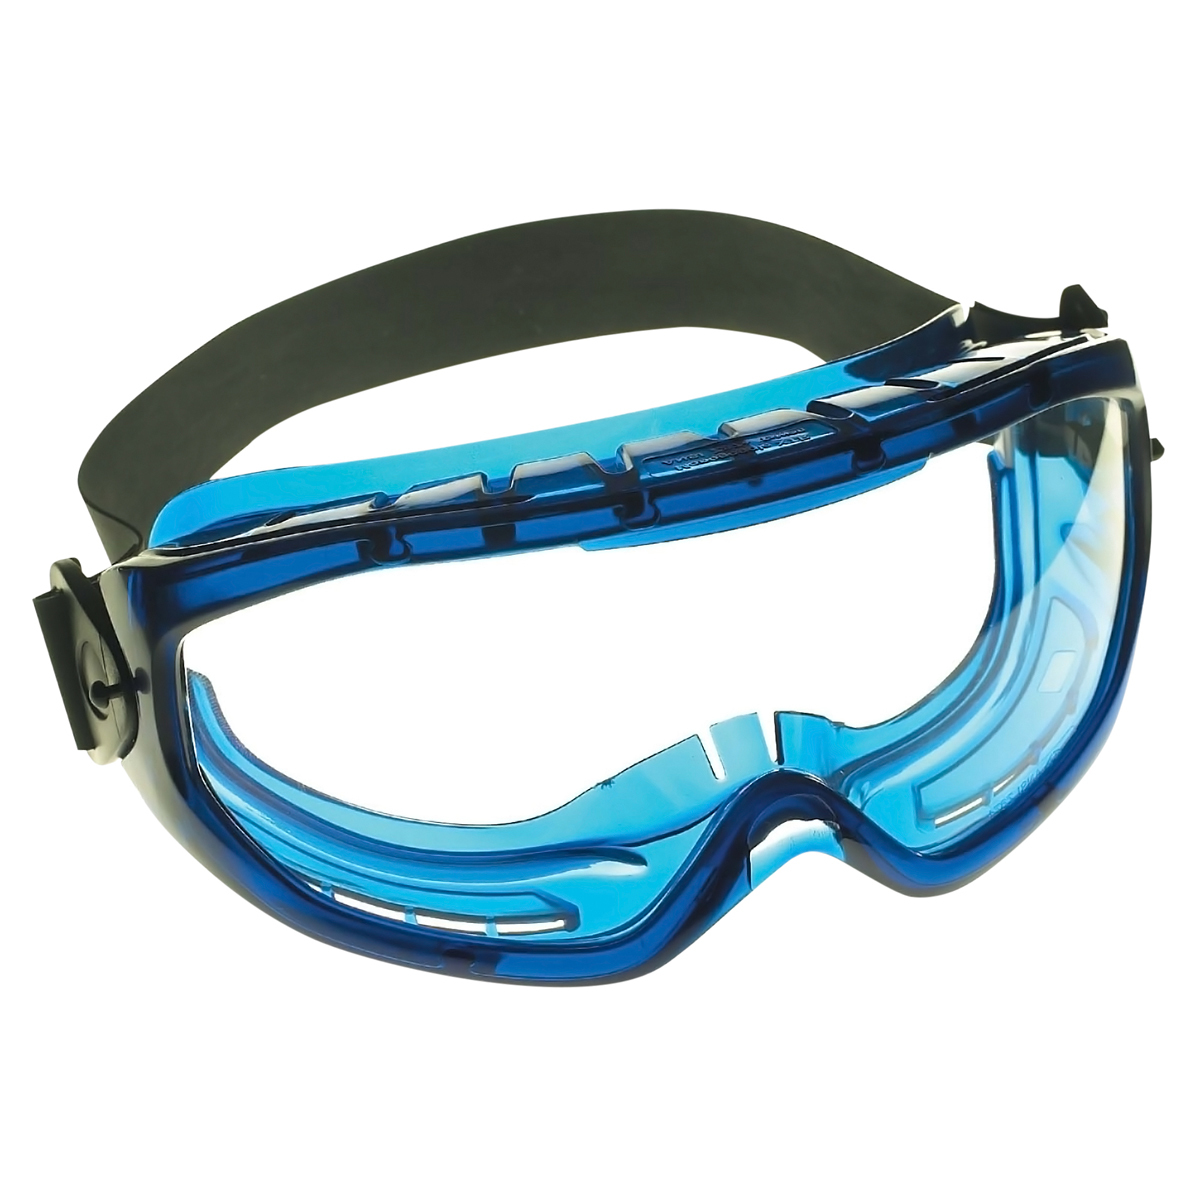 Kimberly-Clark Professional* KleenGuard™ Monogoggle* XTR* Indirect Vent Splash Over The Glasses Goggles With Blue Flexible Frame